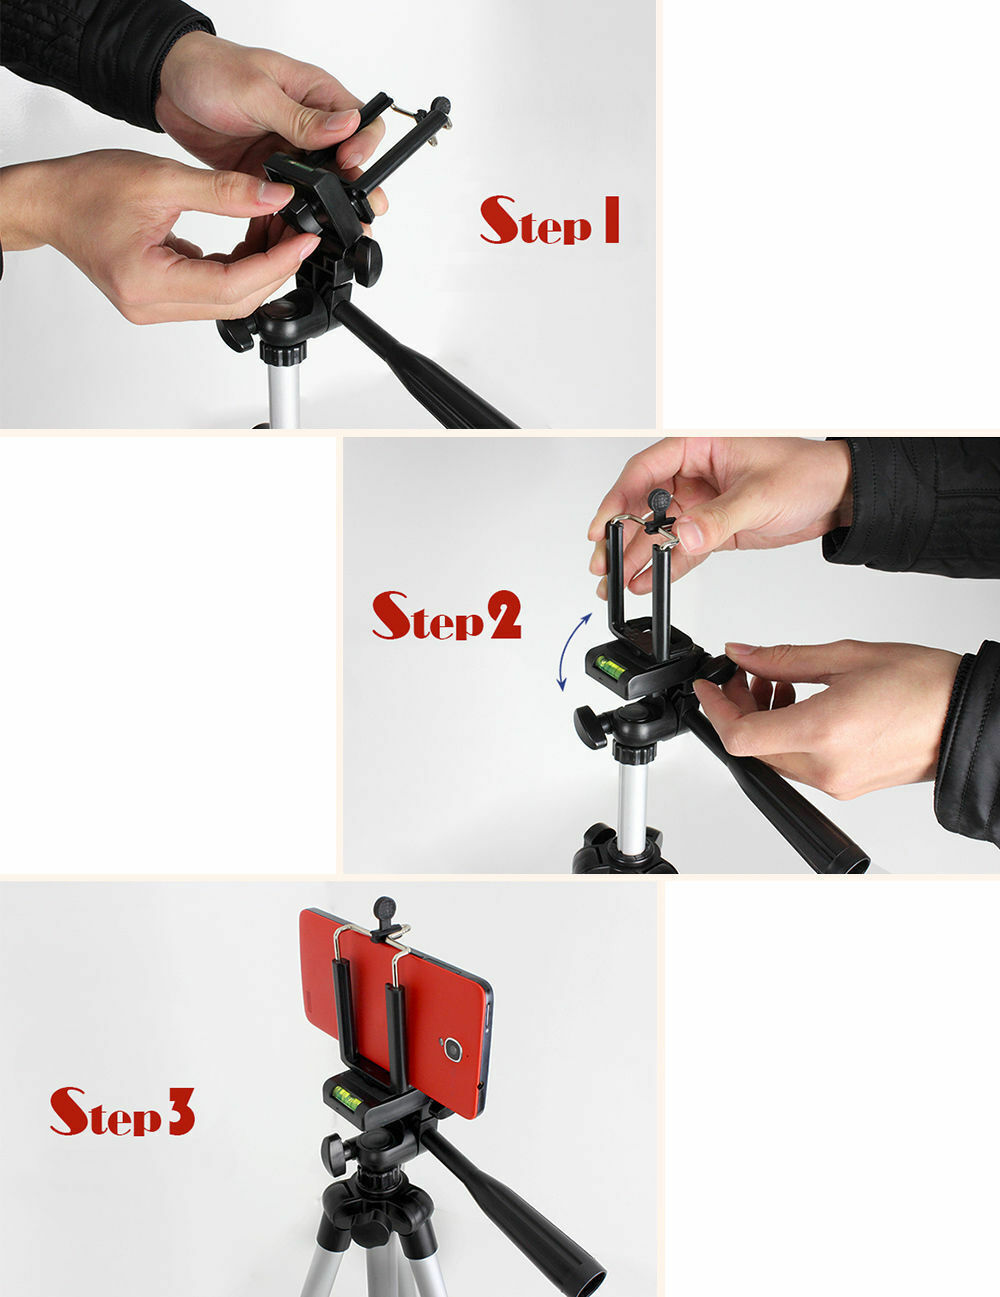 Professional Camera Tripod Stand Holder Mount For Cell Phone